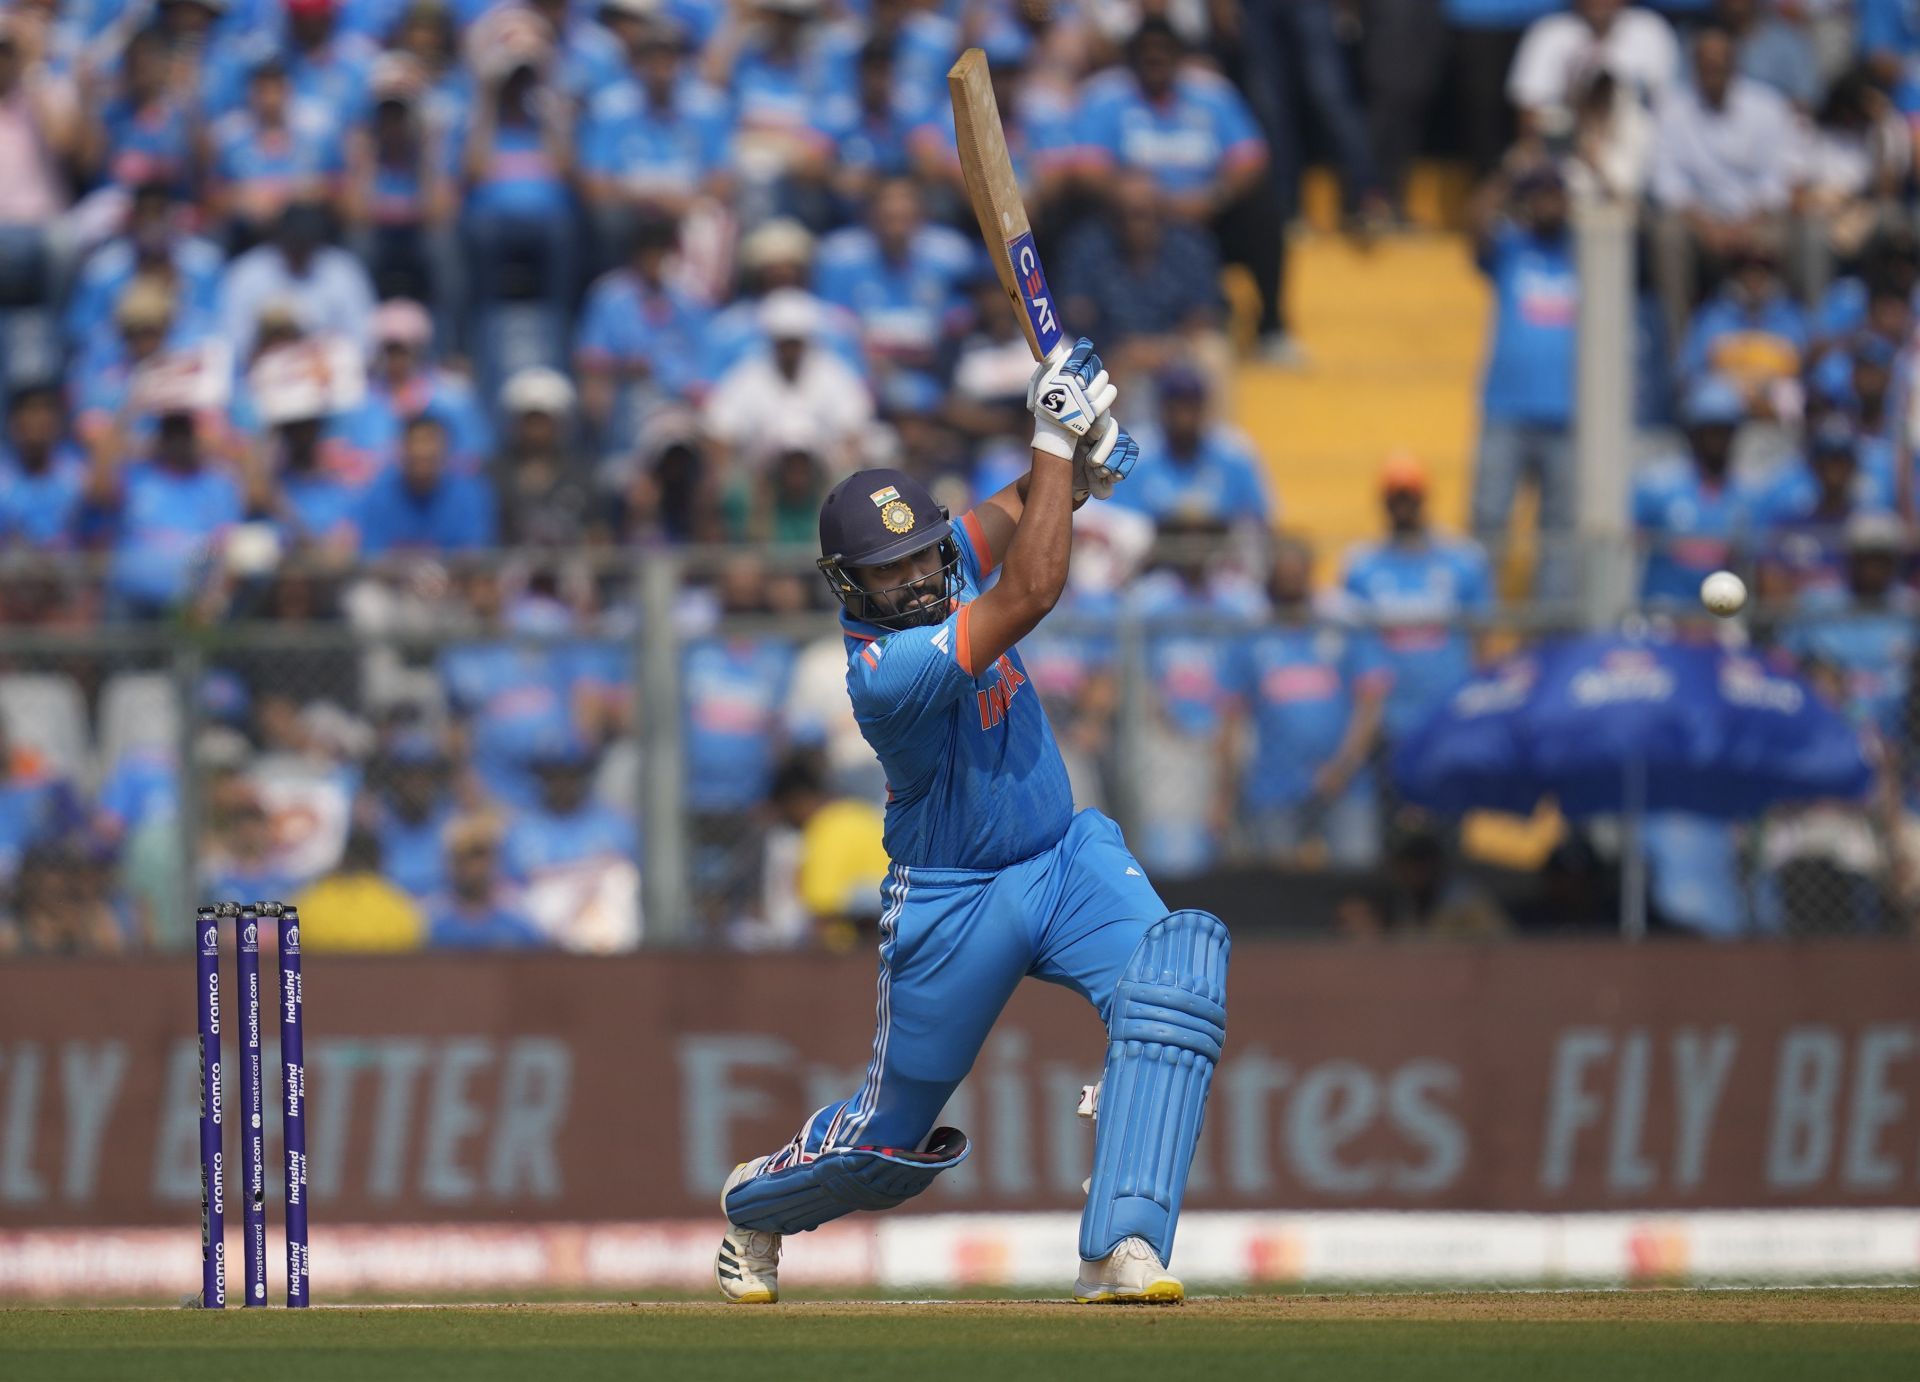 Team India skipper Rohit Sharma has been in blazing form with the bat. (Pic: AP)